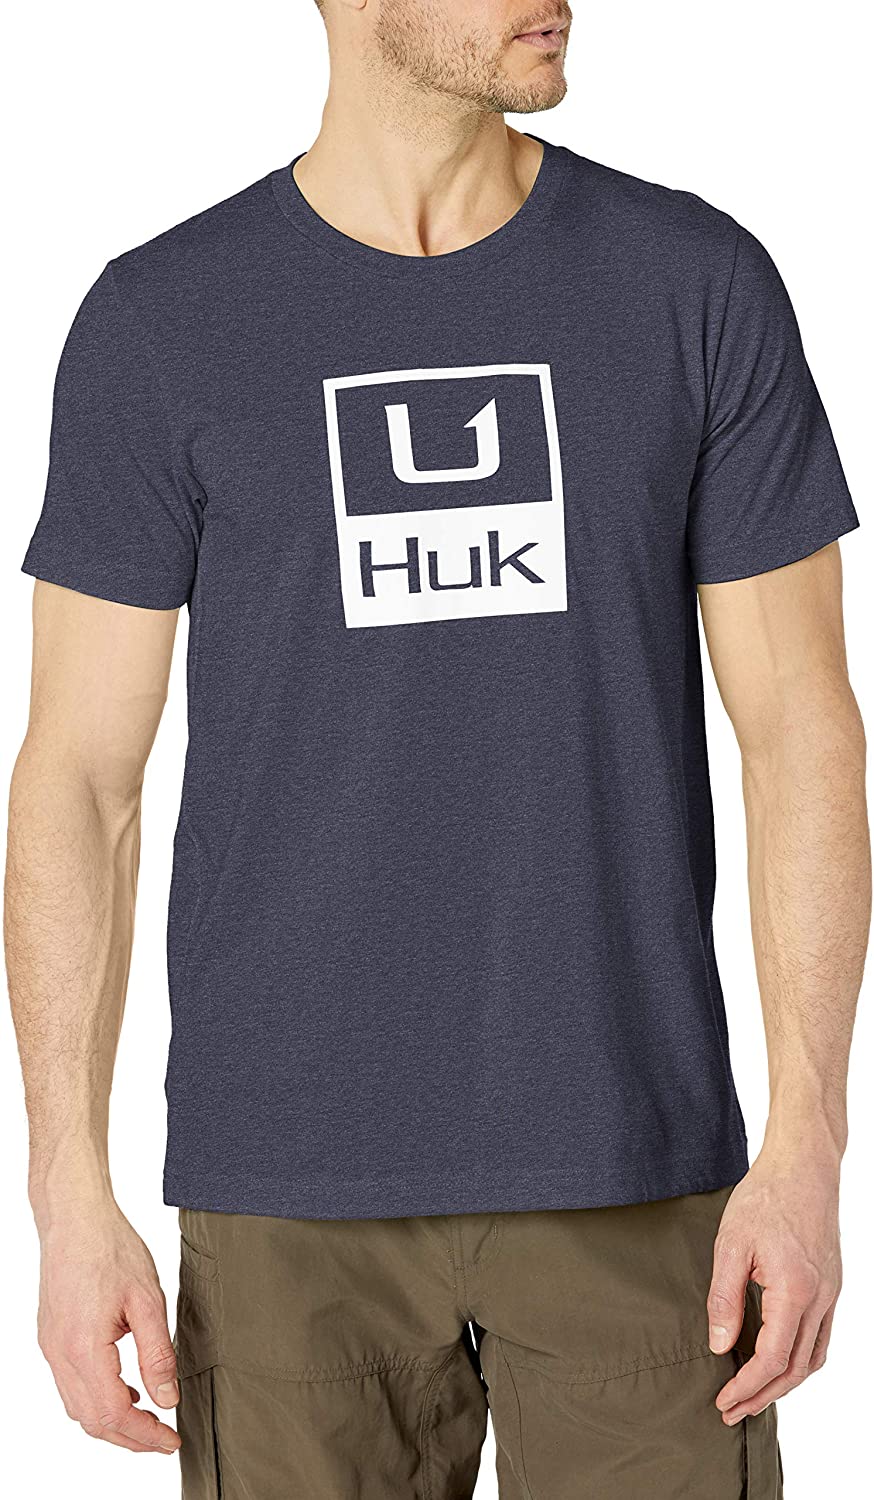 Men's Huk Huk'd Up Performance Tee in Sargasso Sea Heather from the front